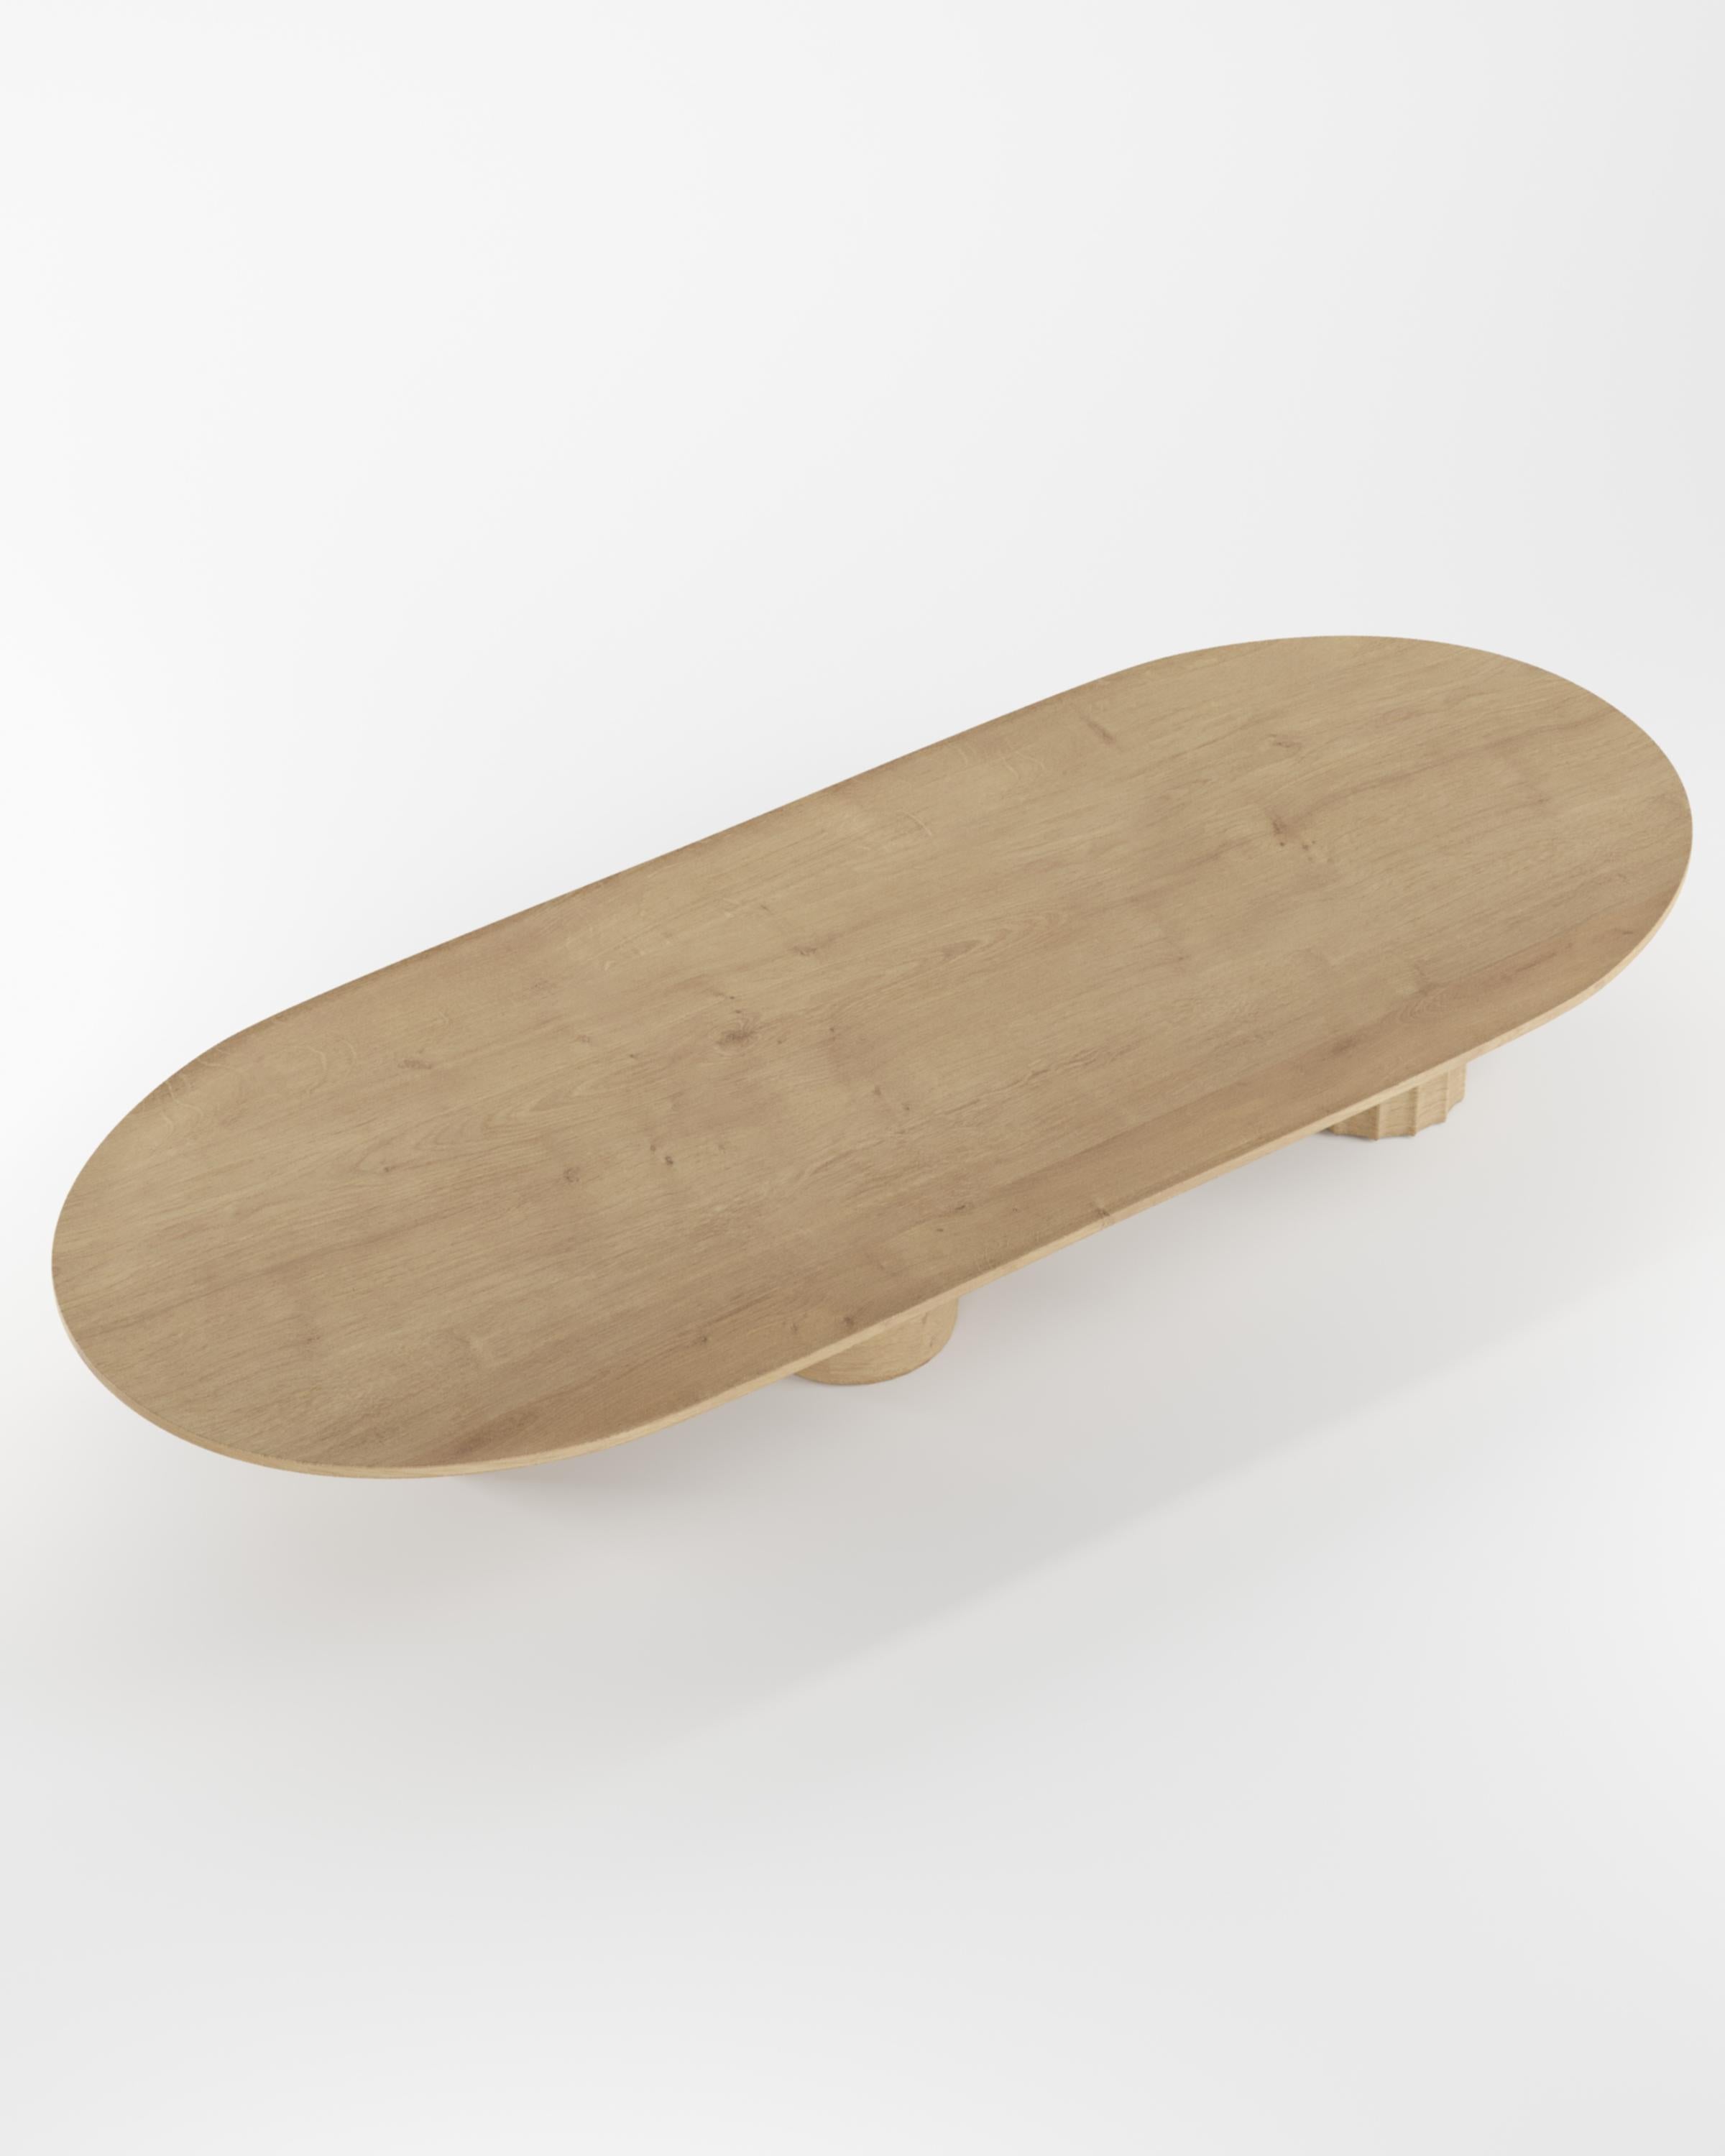 Collector- 21st Century Designed by Alter Ego Djembe Center Table in Natural Oak



DIMENSIONS:
W 180 cm  70,8”
D 70 cm  27,5”
H 31 cm  12,2”


PRODUCT FEATURES
Oak

PRODUCT OPTIONS
Available in all COLLECTOR wood swatches
Available to be lacquered